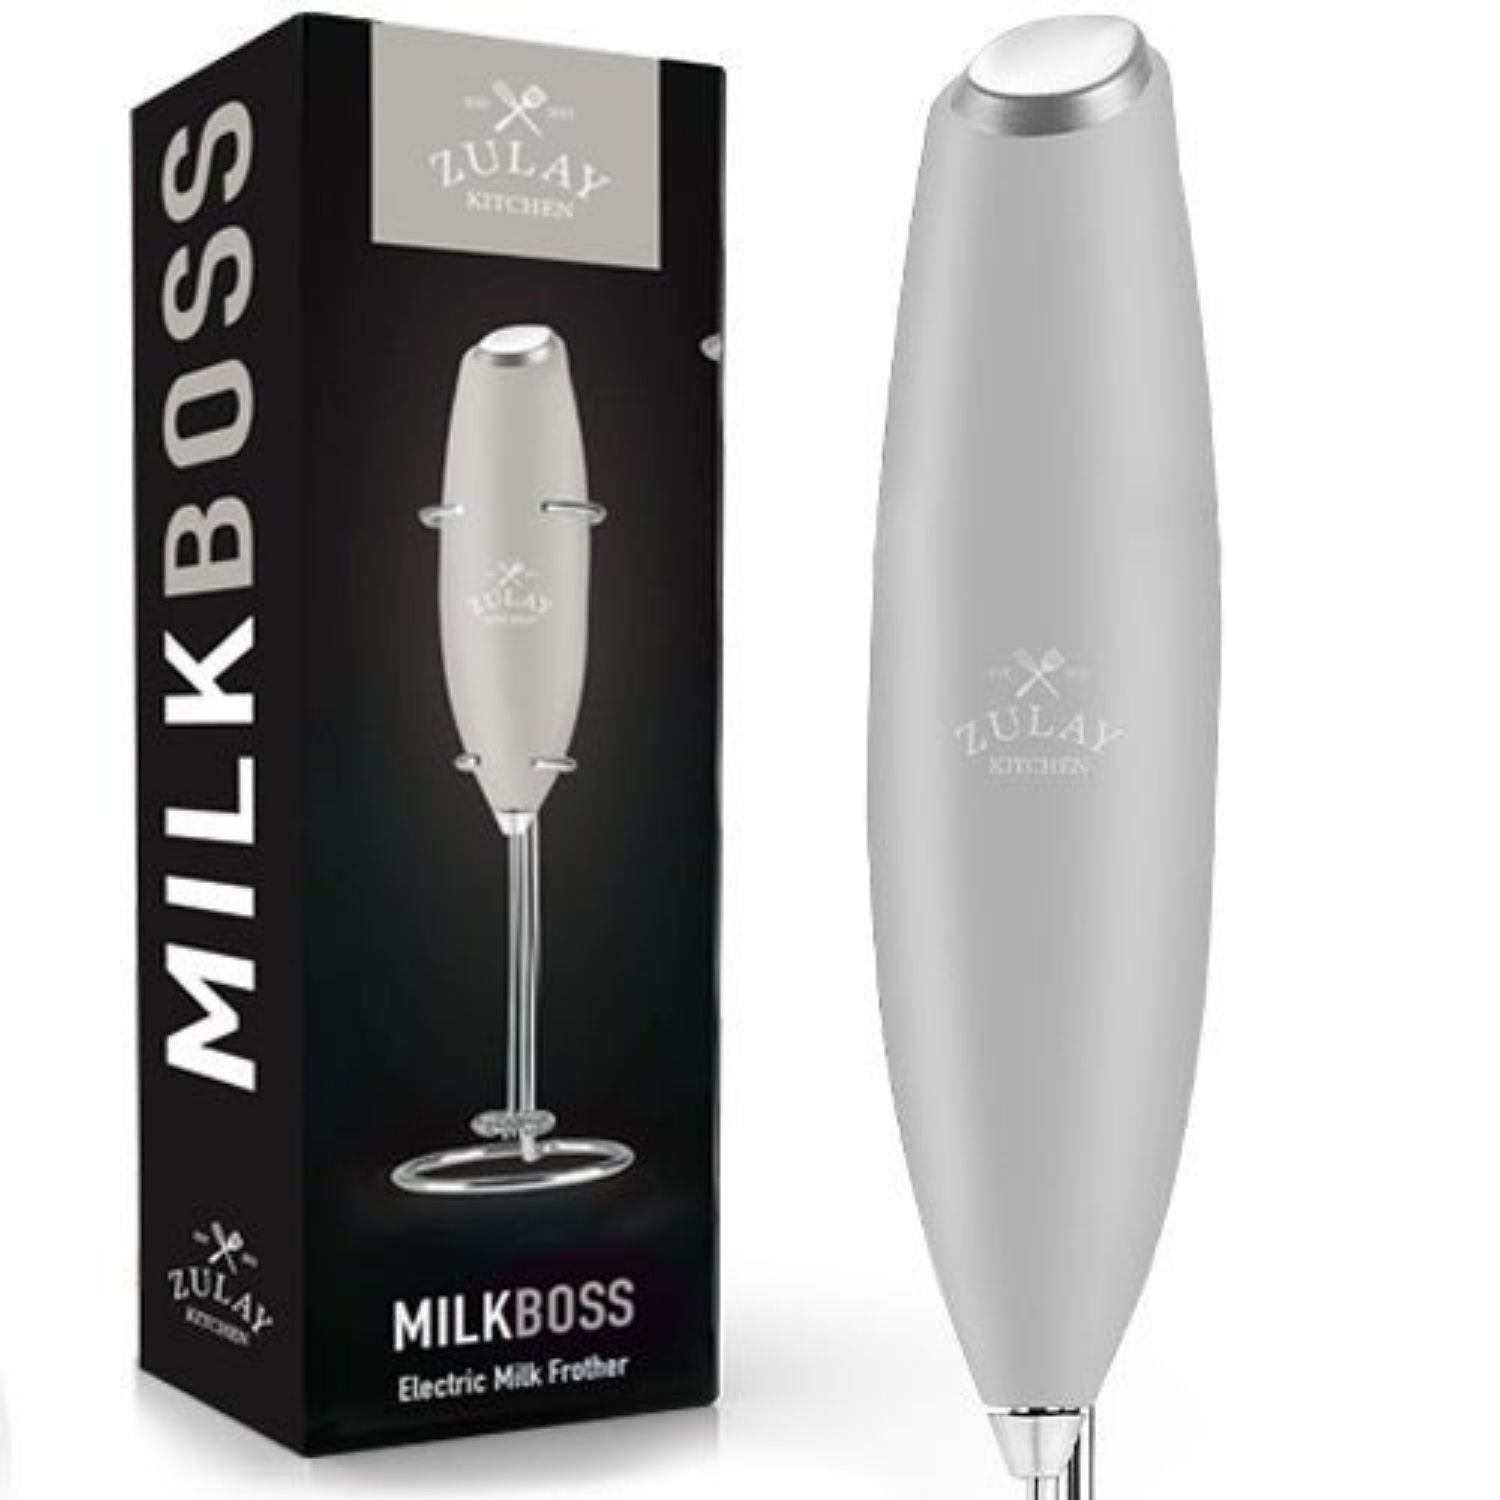 Zulay Kitchen MILK BOSS Milk Frother With Stand - Hearts, 1 - Kroger